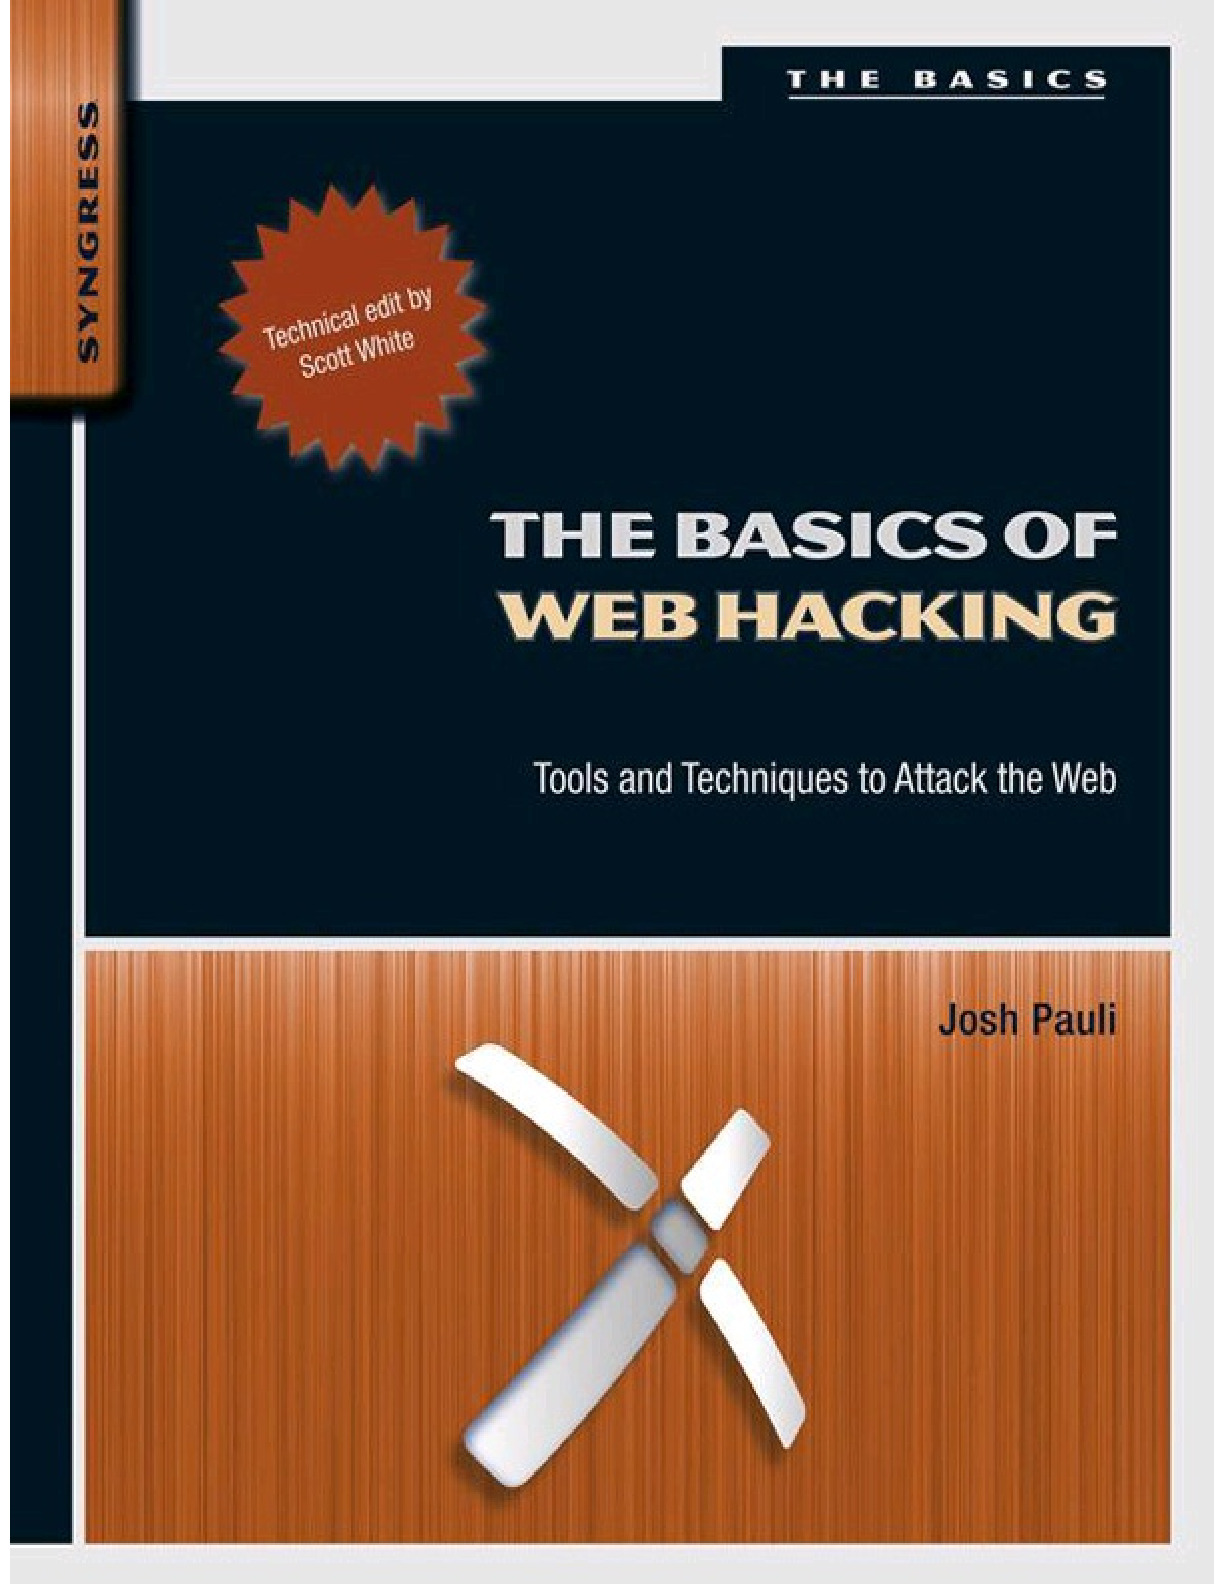 54. The Basics of Web Hacking – Tools and Techniques to Attack the Web(2013)